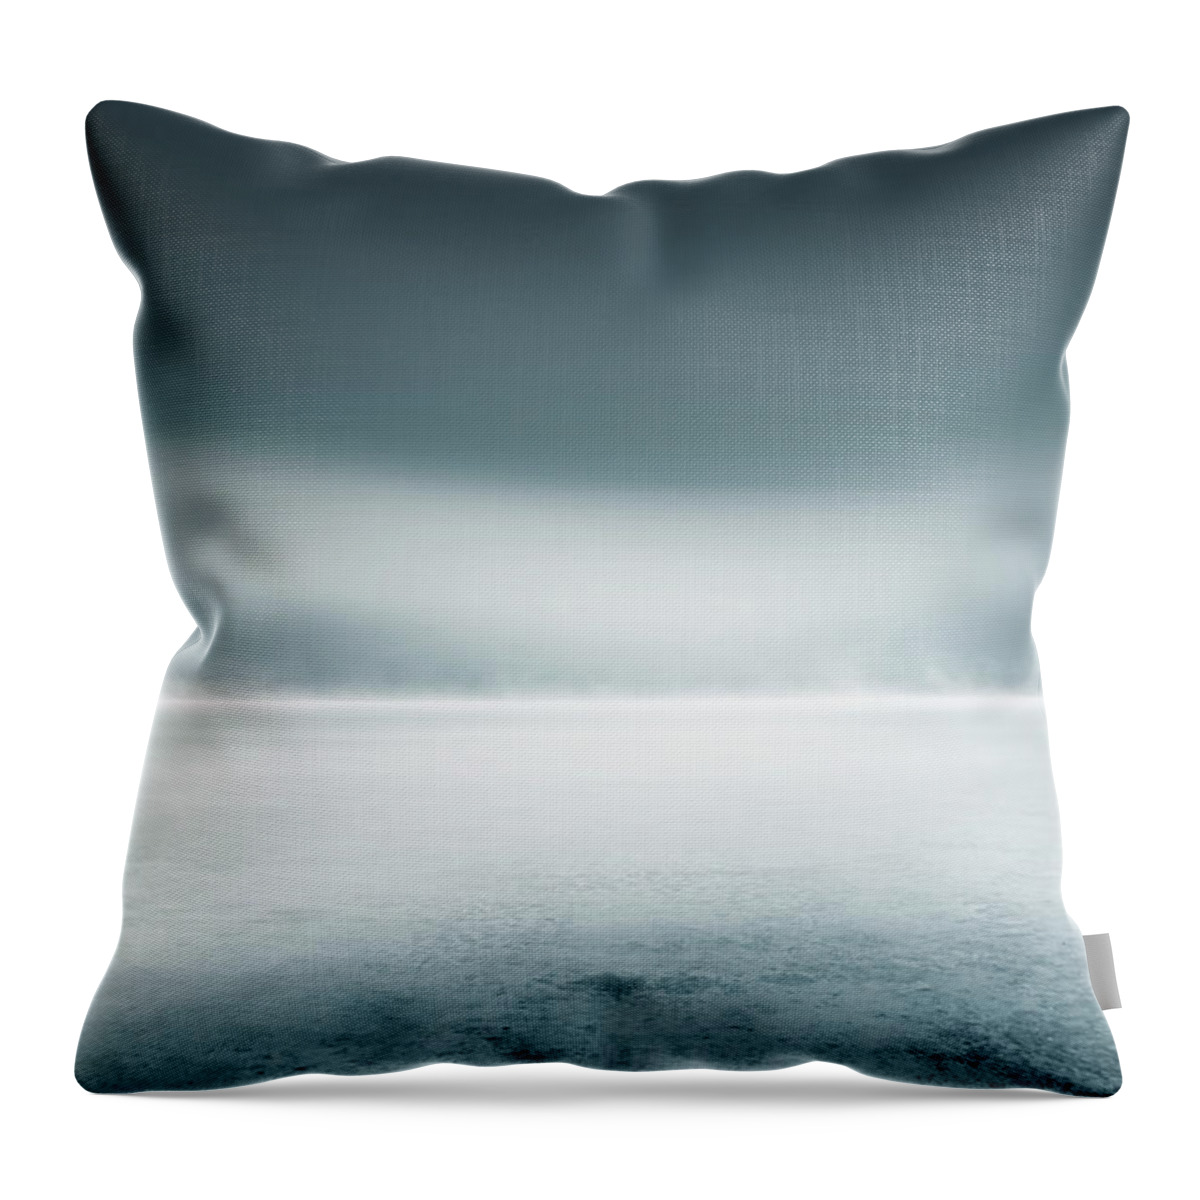 Tranquility Throw Pillow featuring the digital art Cold Studio Background by Aaron Foster